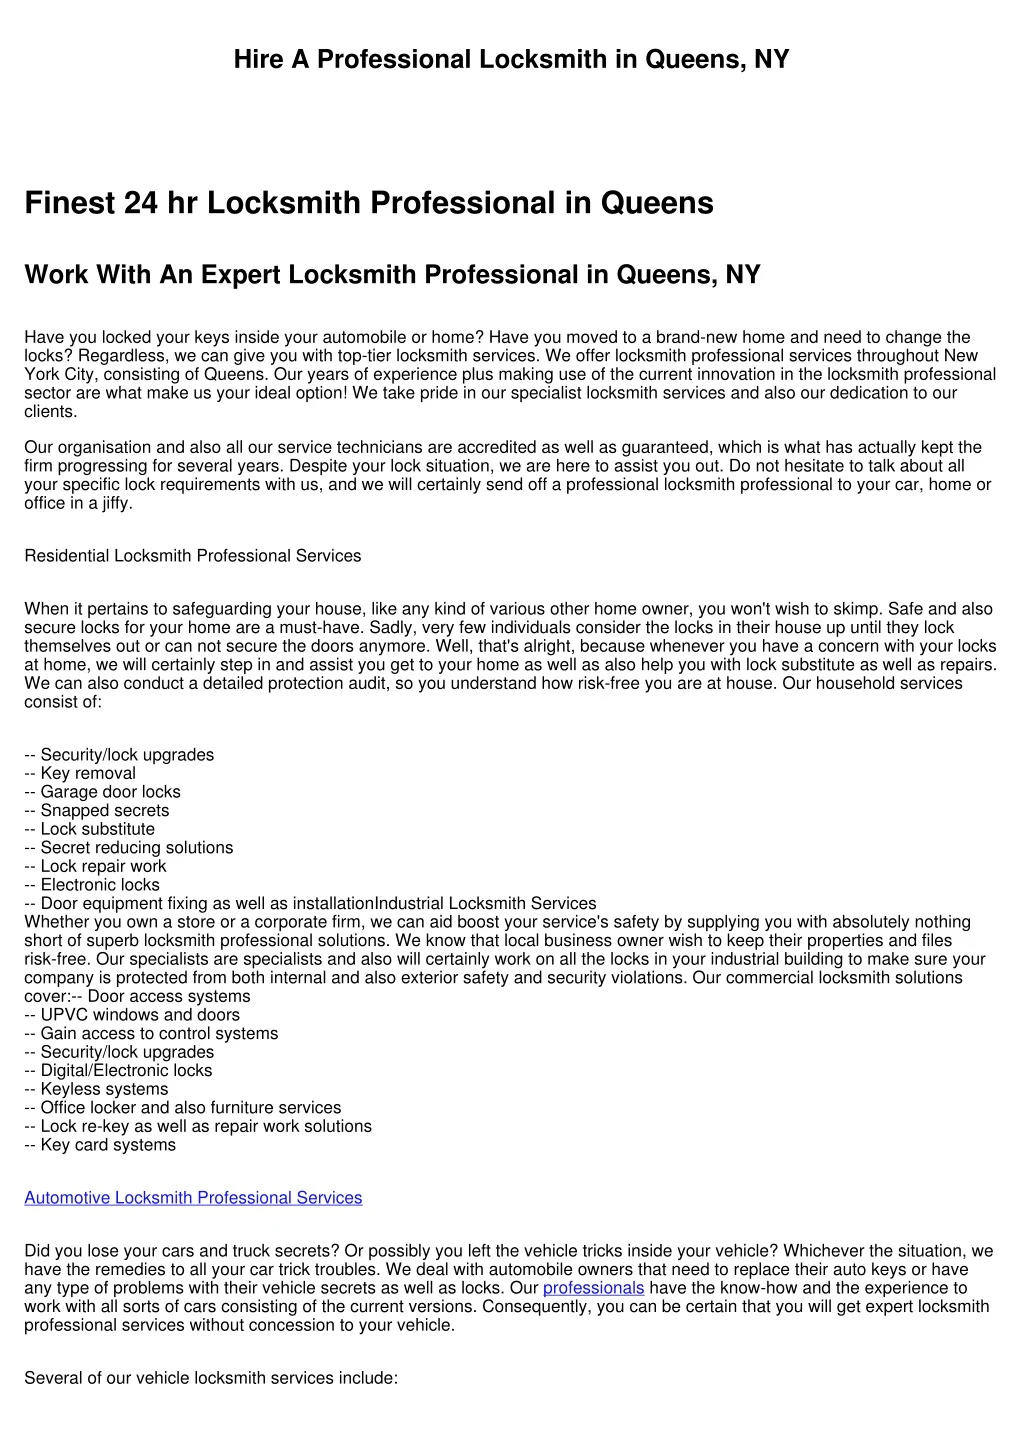 hire a professional locksmith in queens ny